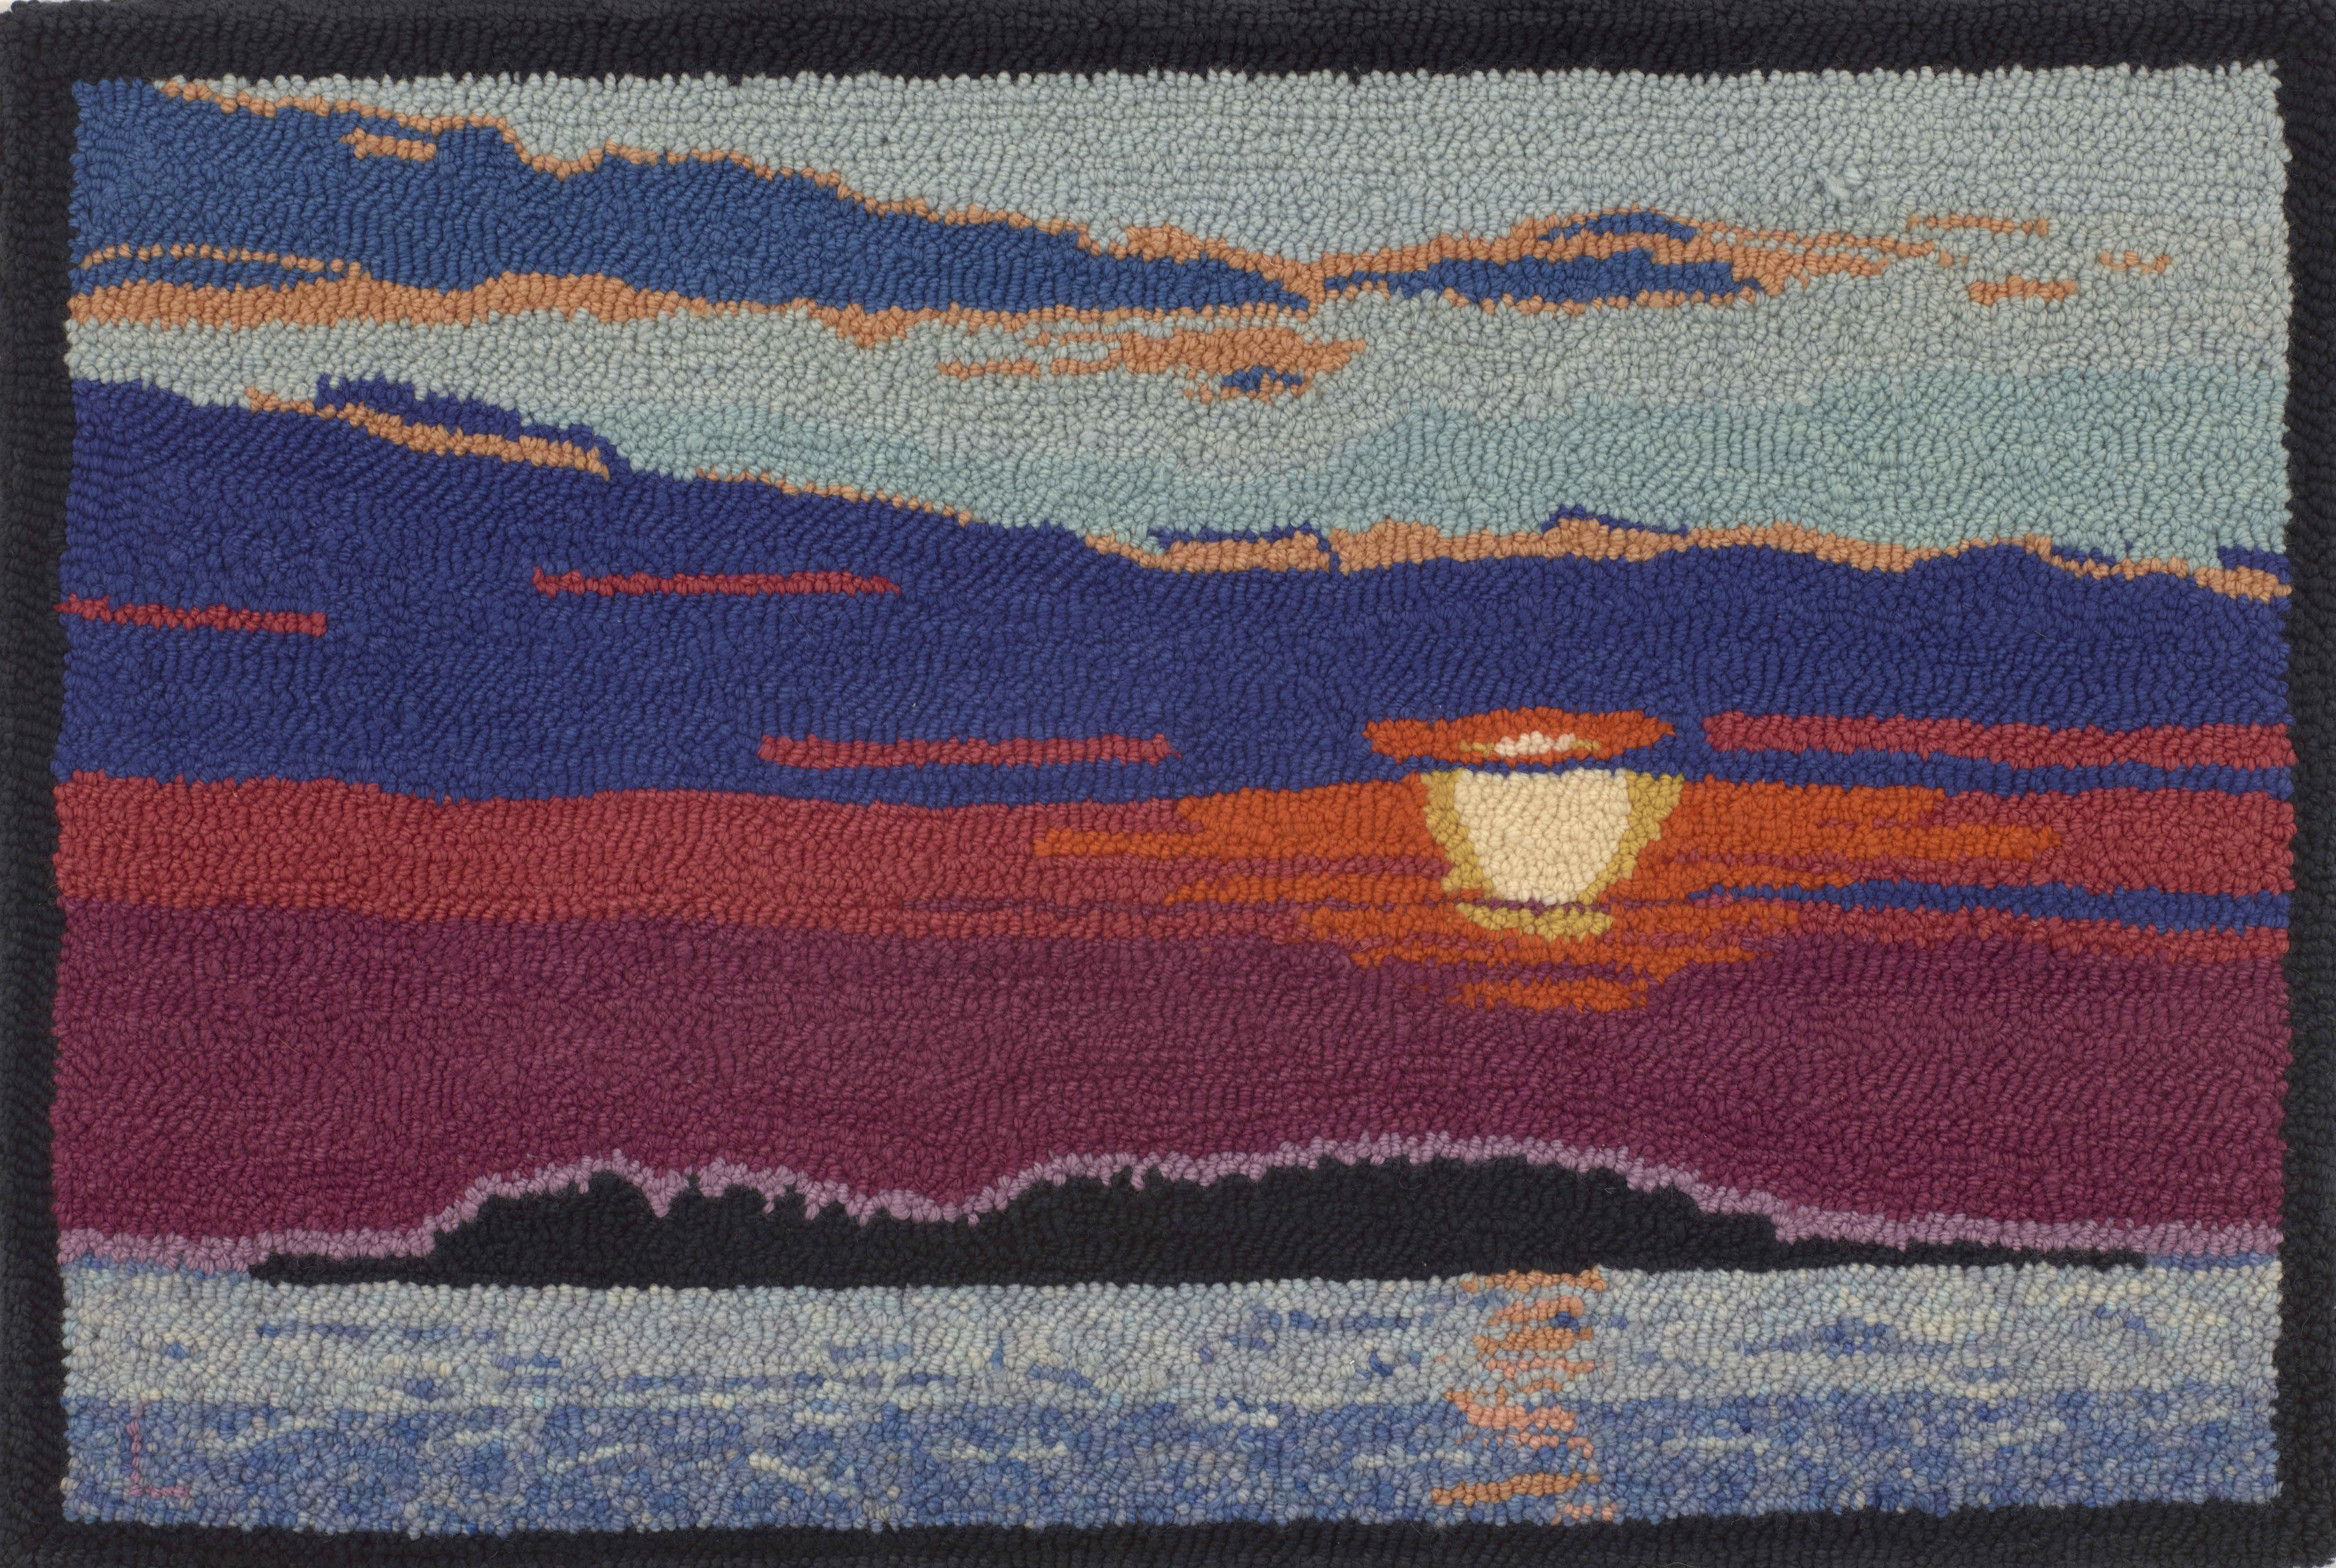 Mid-April Sunrise, 2019, cotton and hand-dyed wool, 24 x 36 inches